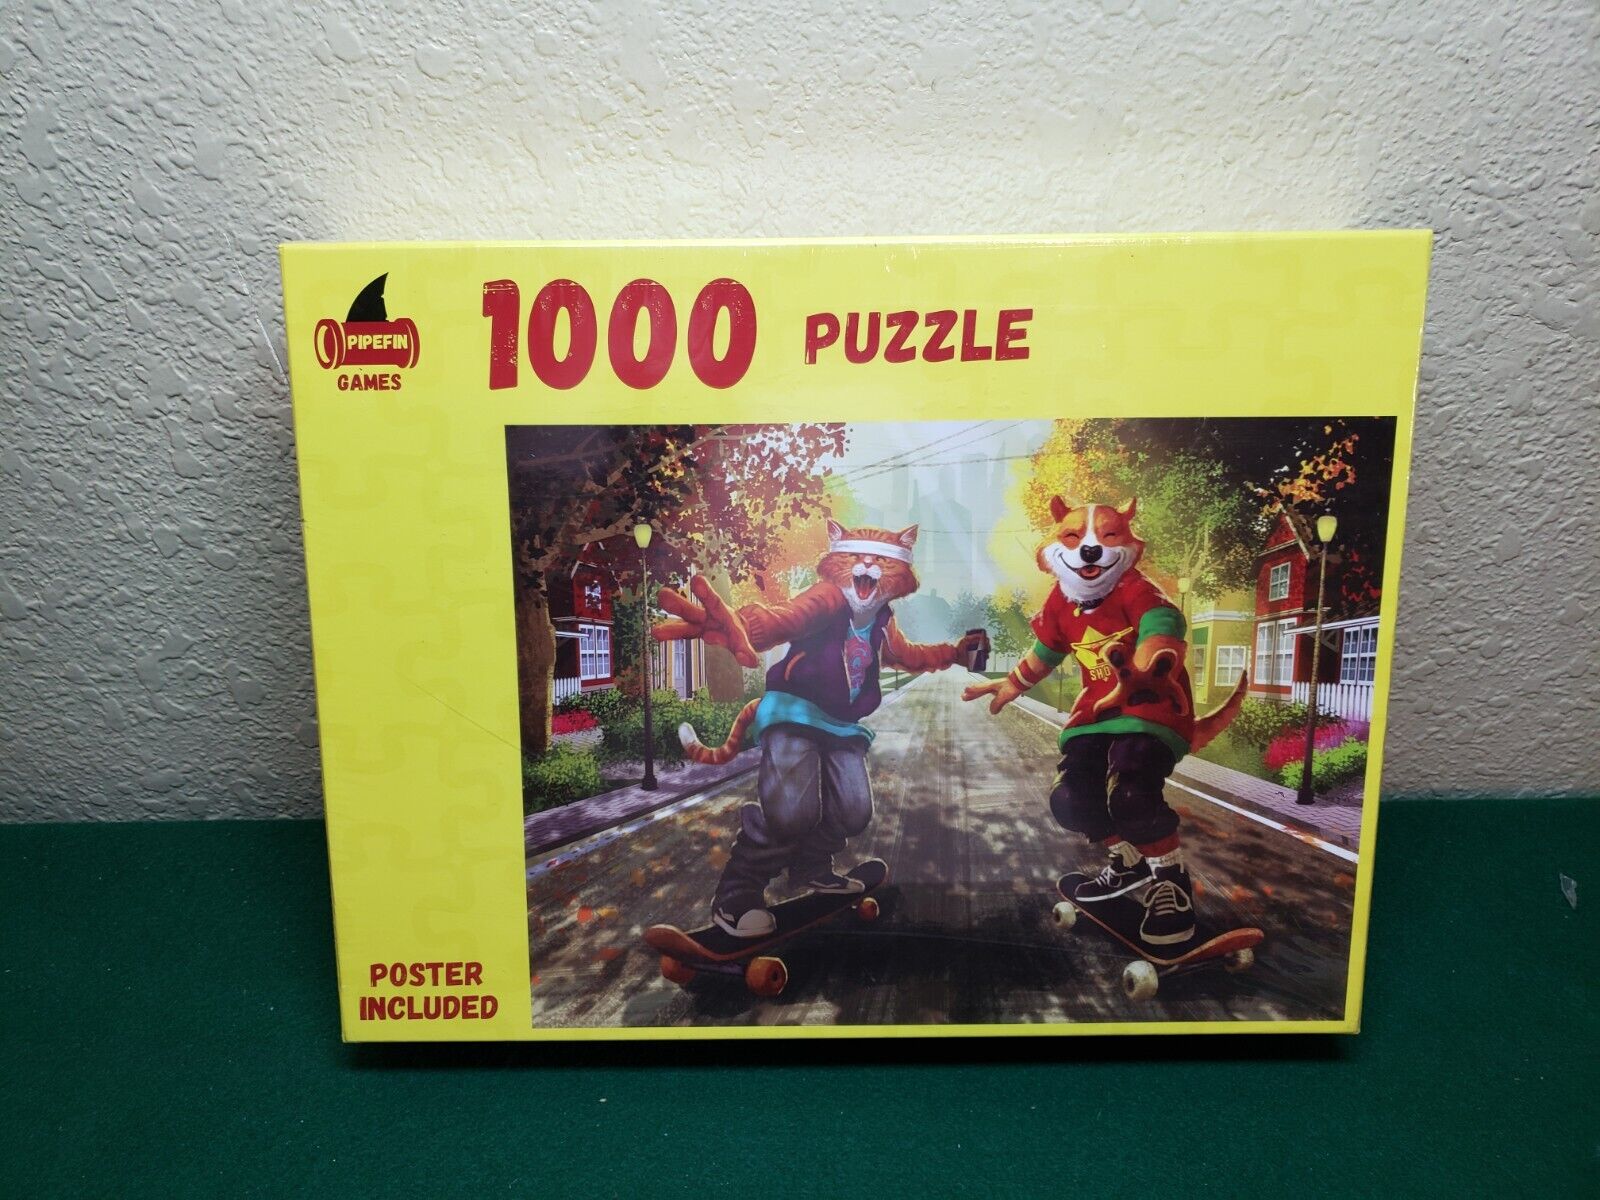 New Pets On Skateboards Jigsaw Puzzle 1000 Pcs 27x19 W/ Poster Pipefin Games